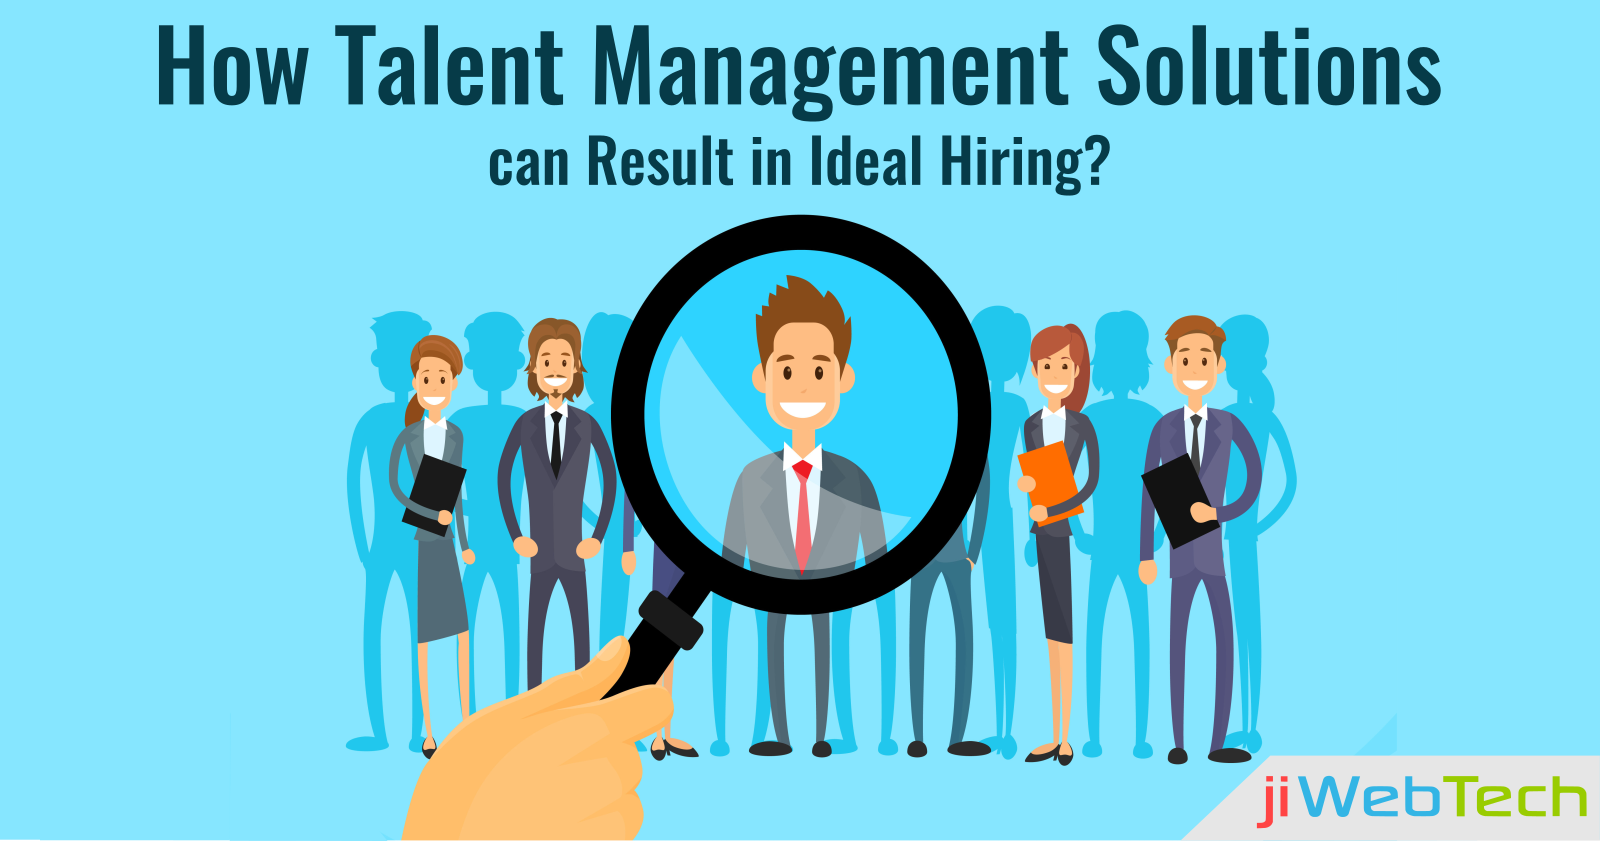 How Talent Management Solutions can Result in Ideal Hiring